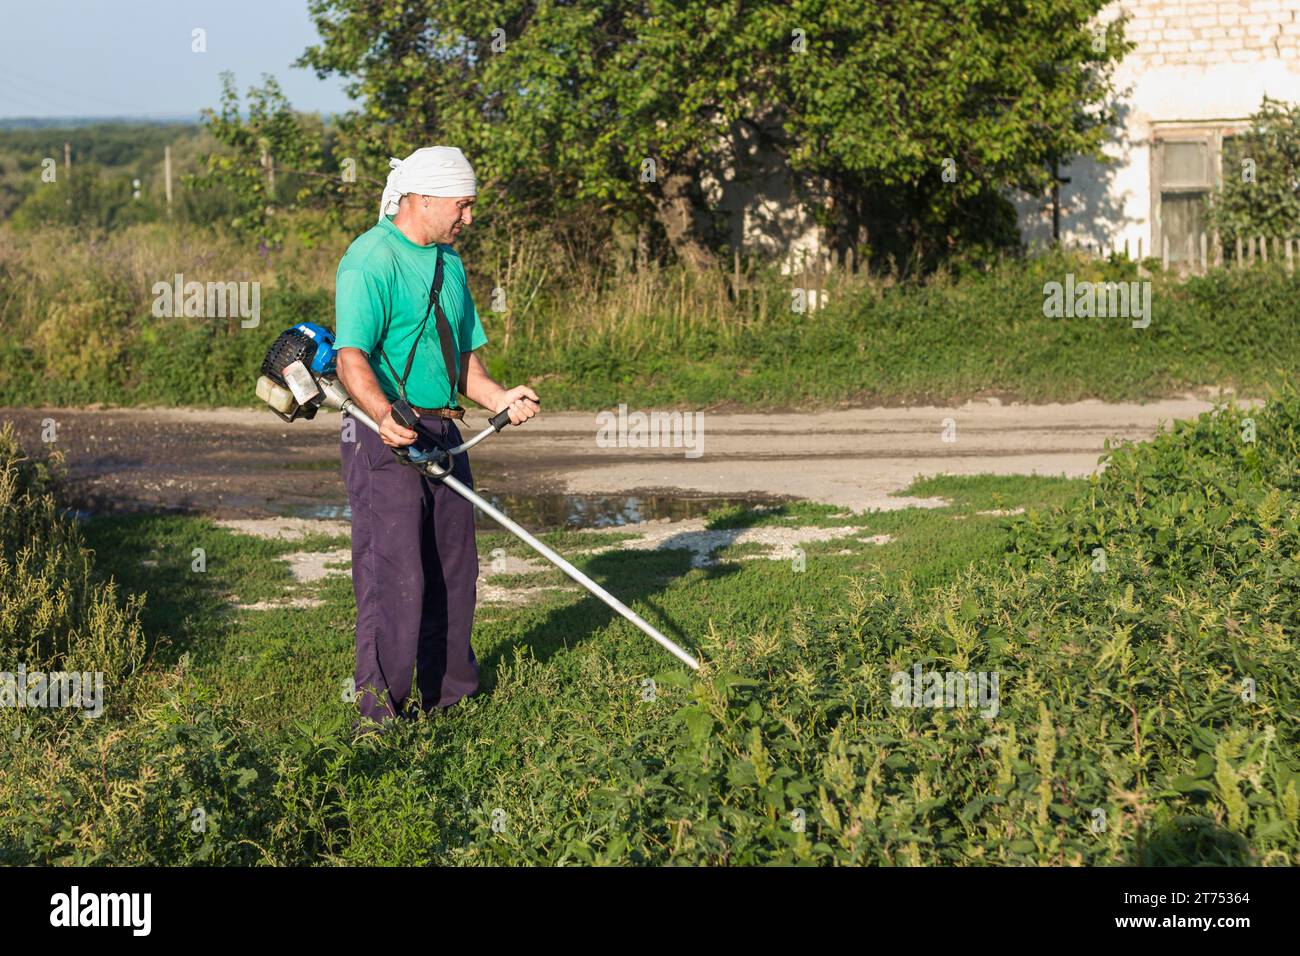 Man farm sewing grass with lawn mower Stock Photo